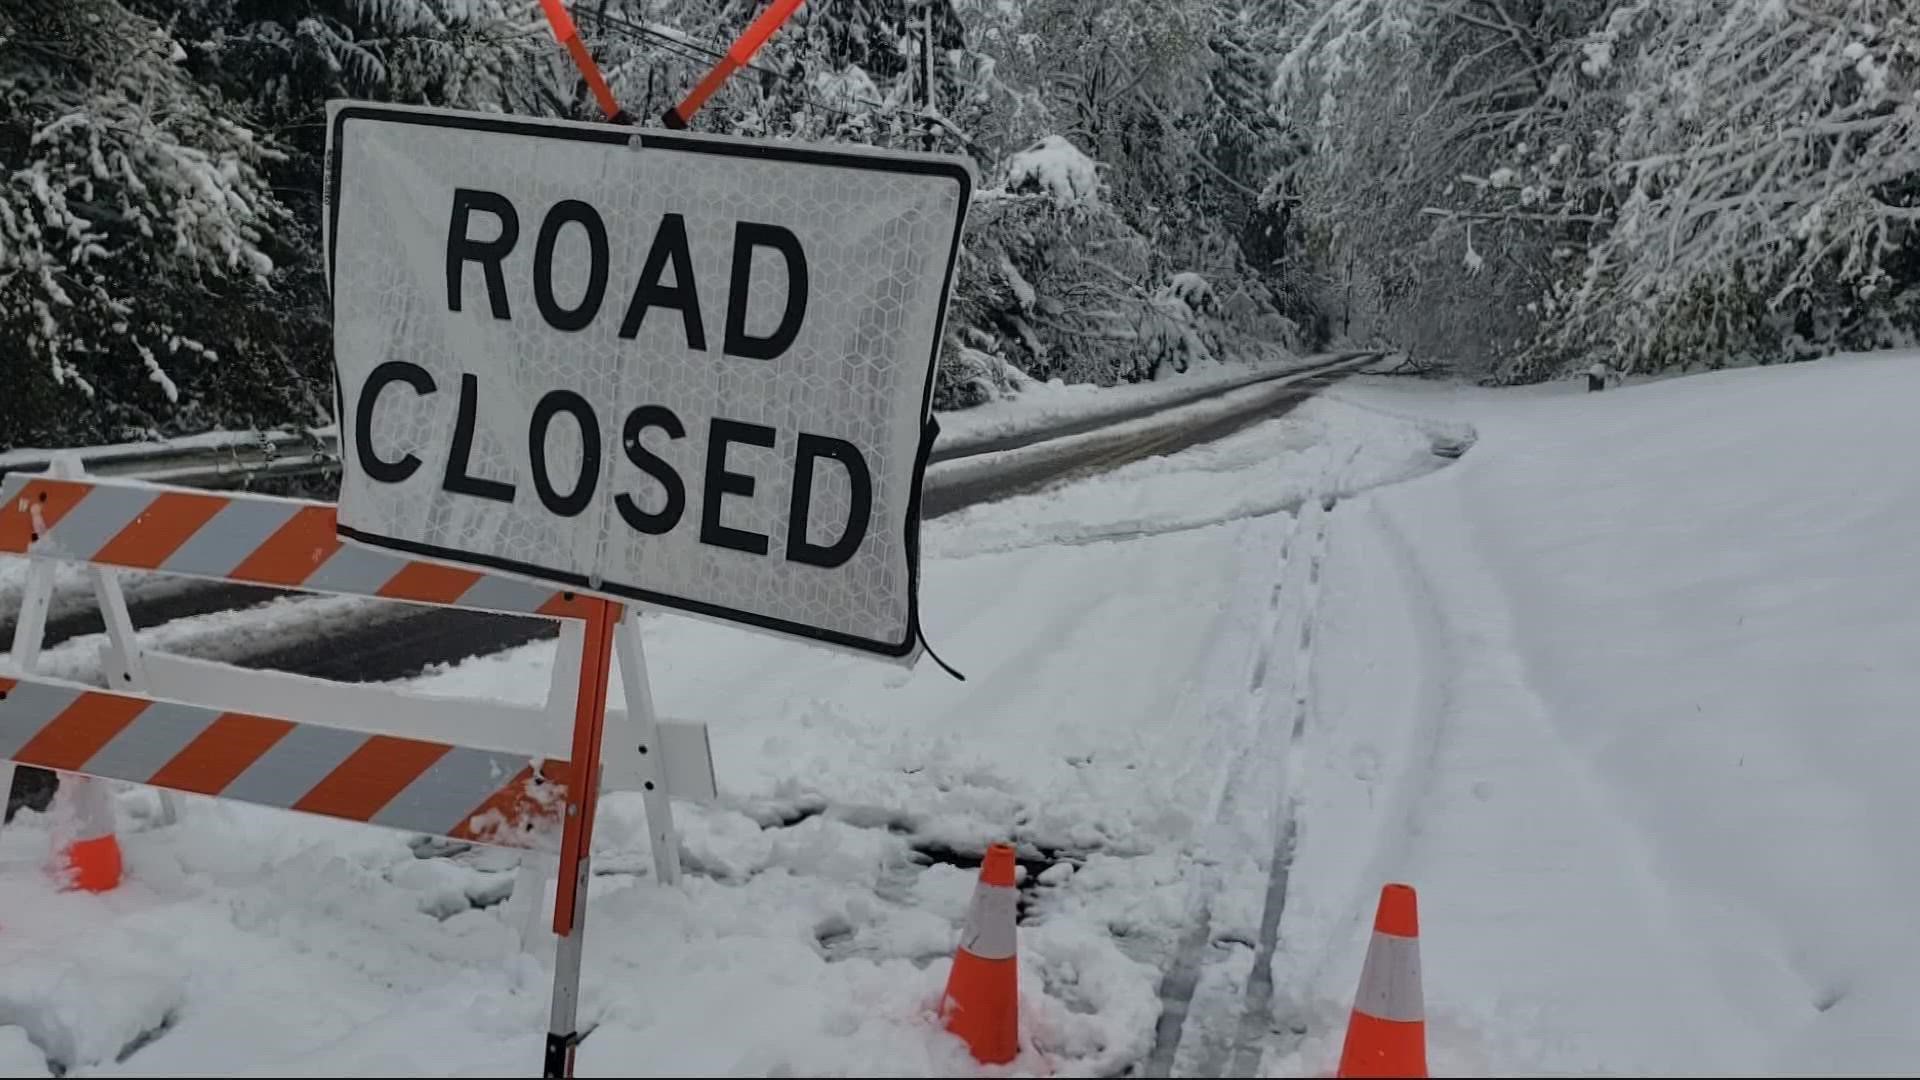 Crews were still working to clear hundreds of downed trees and branches from Portland-area streets. The storm could continue to impact Tuesday's morning commute.